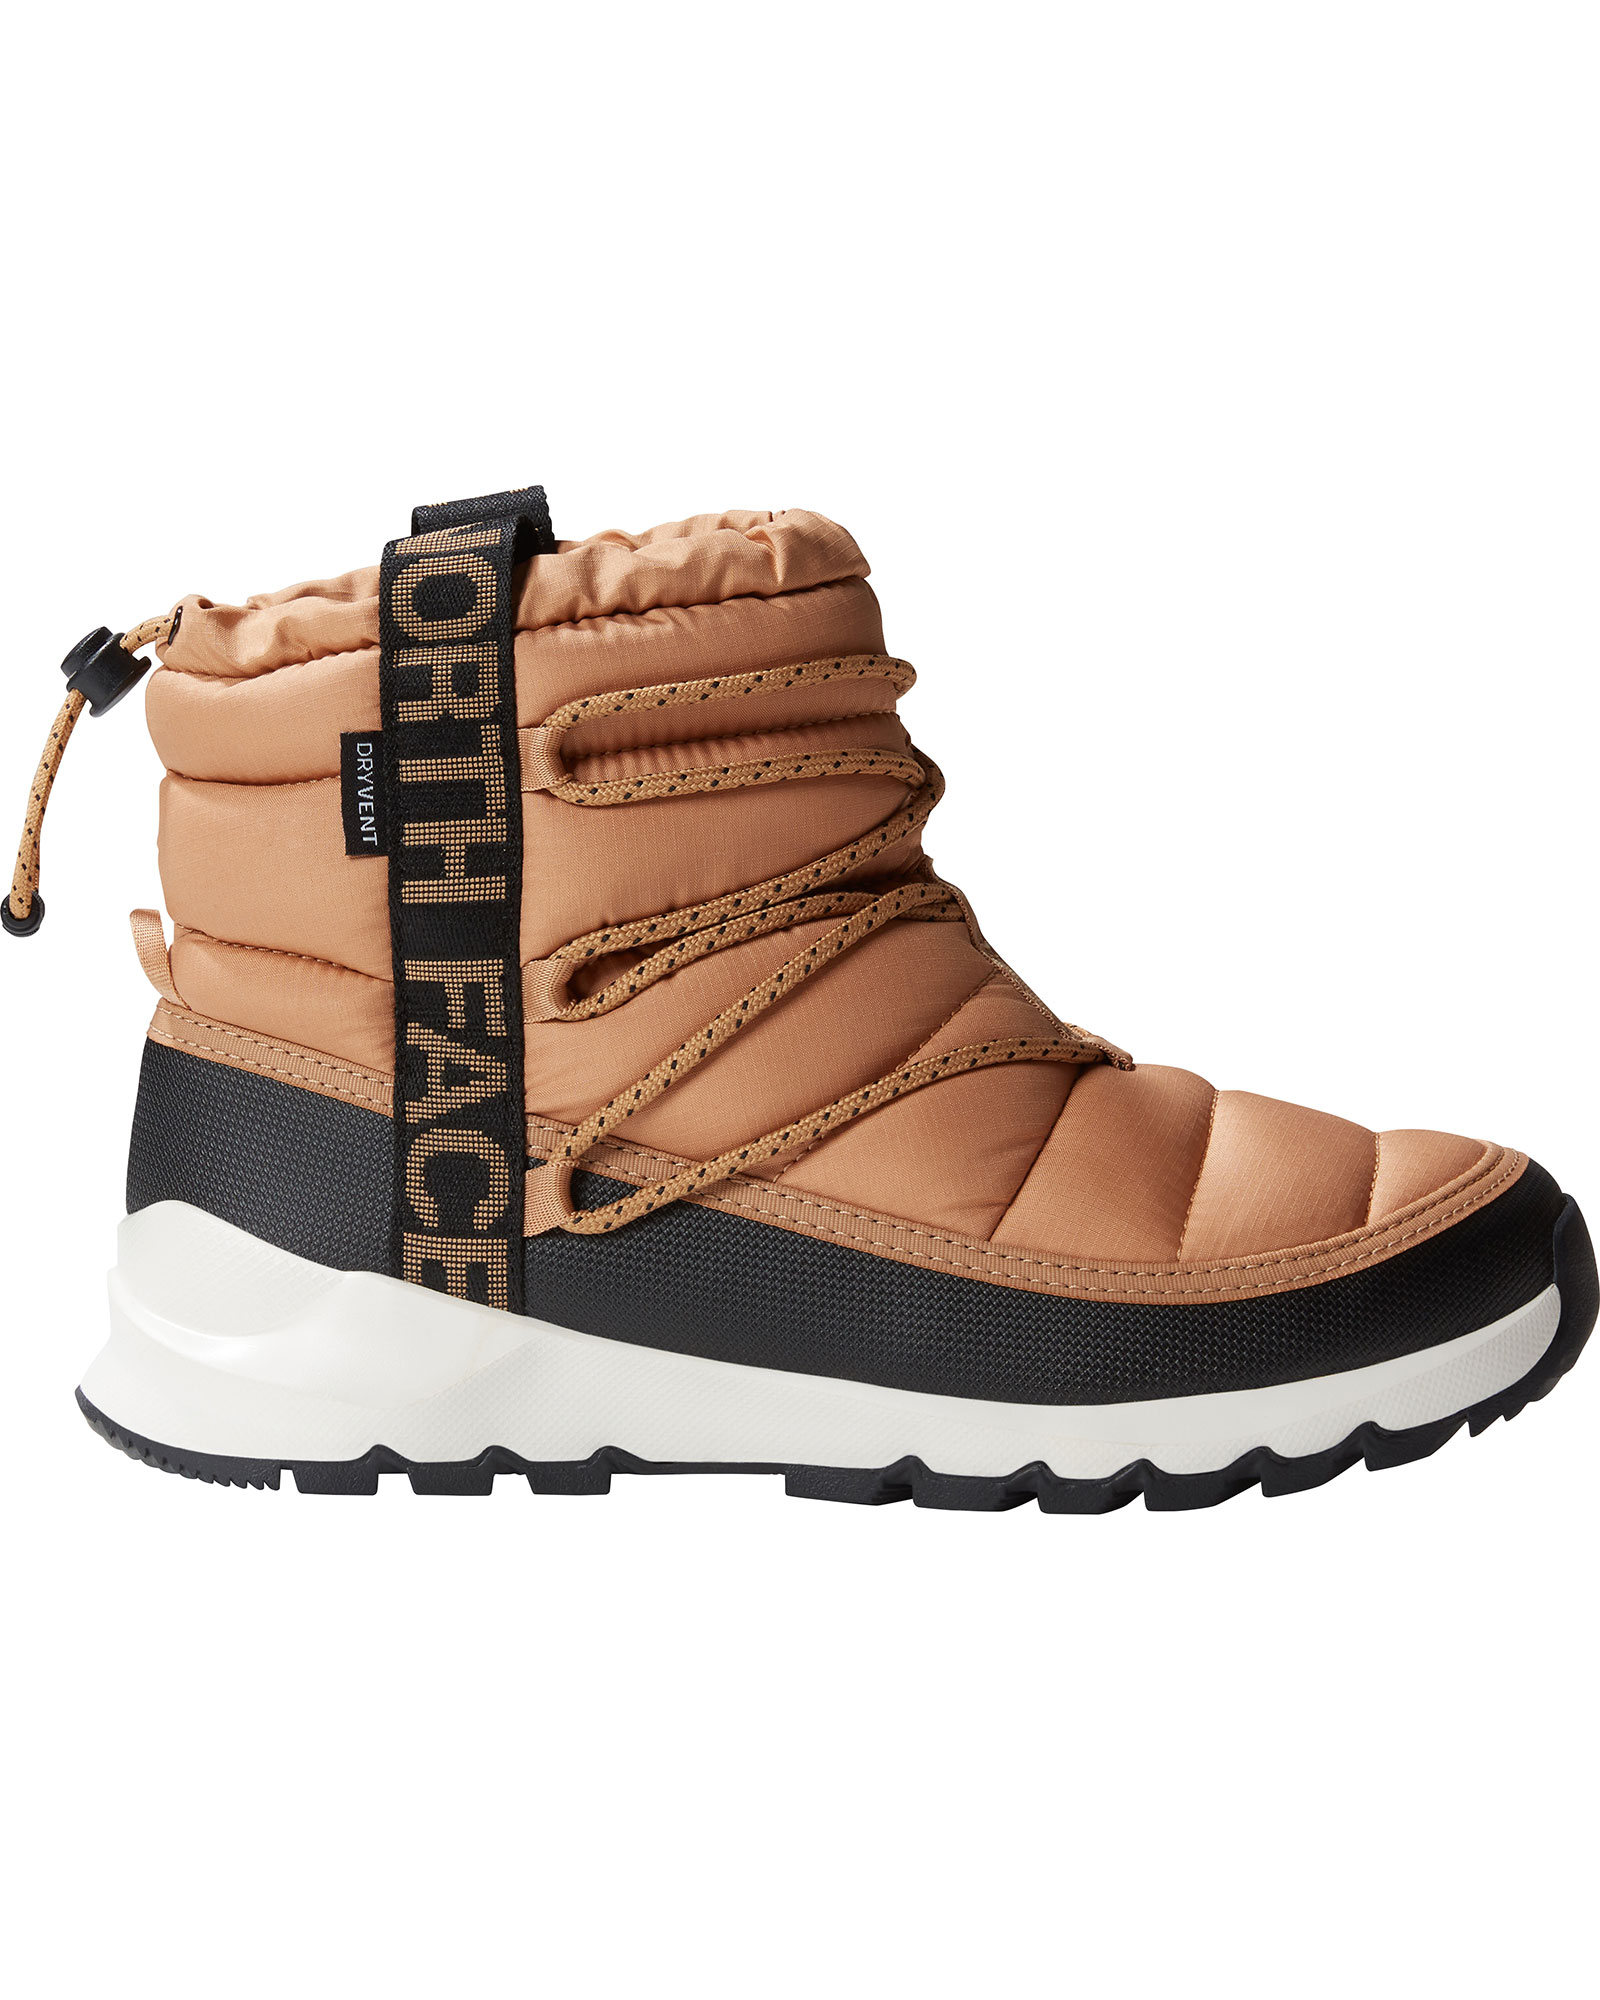 The North Face Women’s ThermoBall Lace Up Waterproof Boots - Almond Butter/TNF Black UK 5